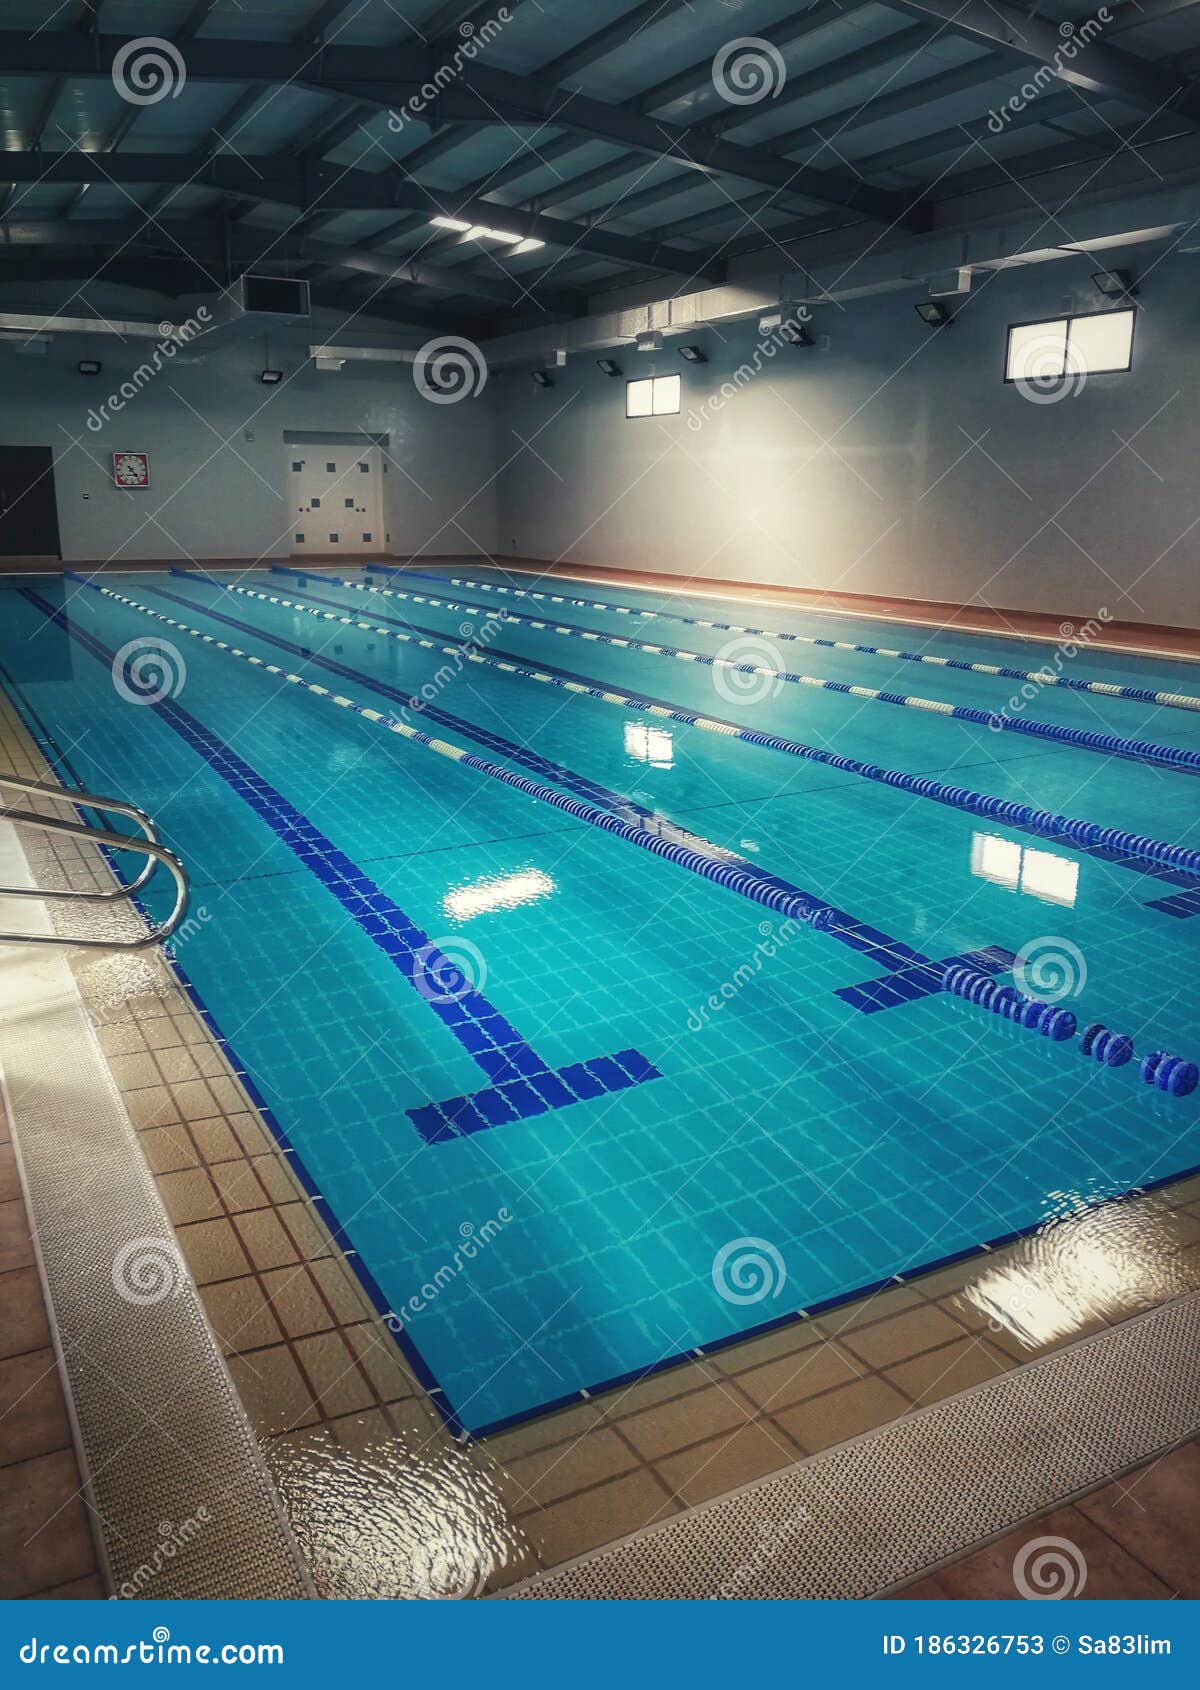 25 Meters Indoor Swimming Pool in Sultan Qaboos Sports Complex , Muscat  Oman Stock Image - Image of sports, swimming: 186326753